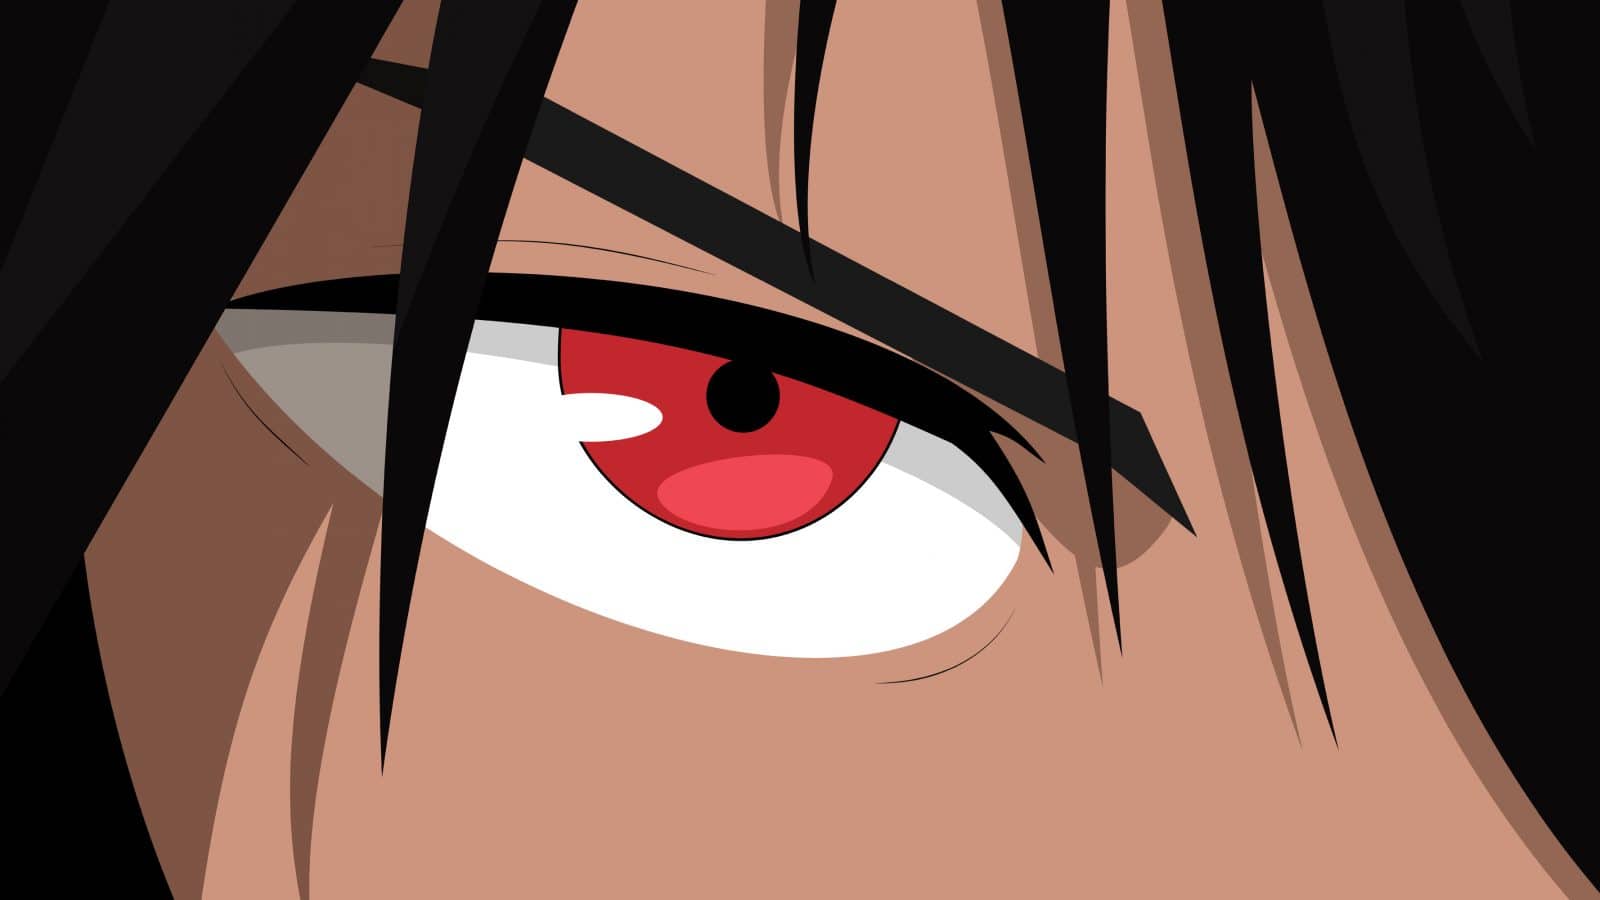 anime character with black hair and a red eye